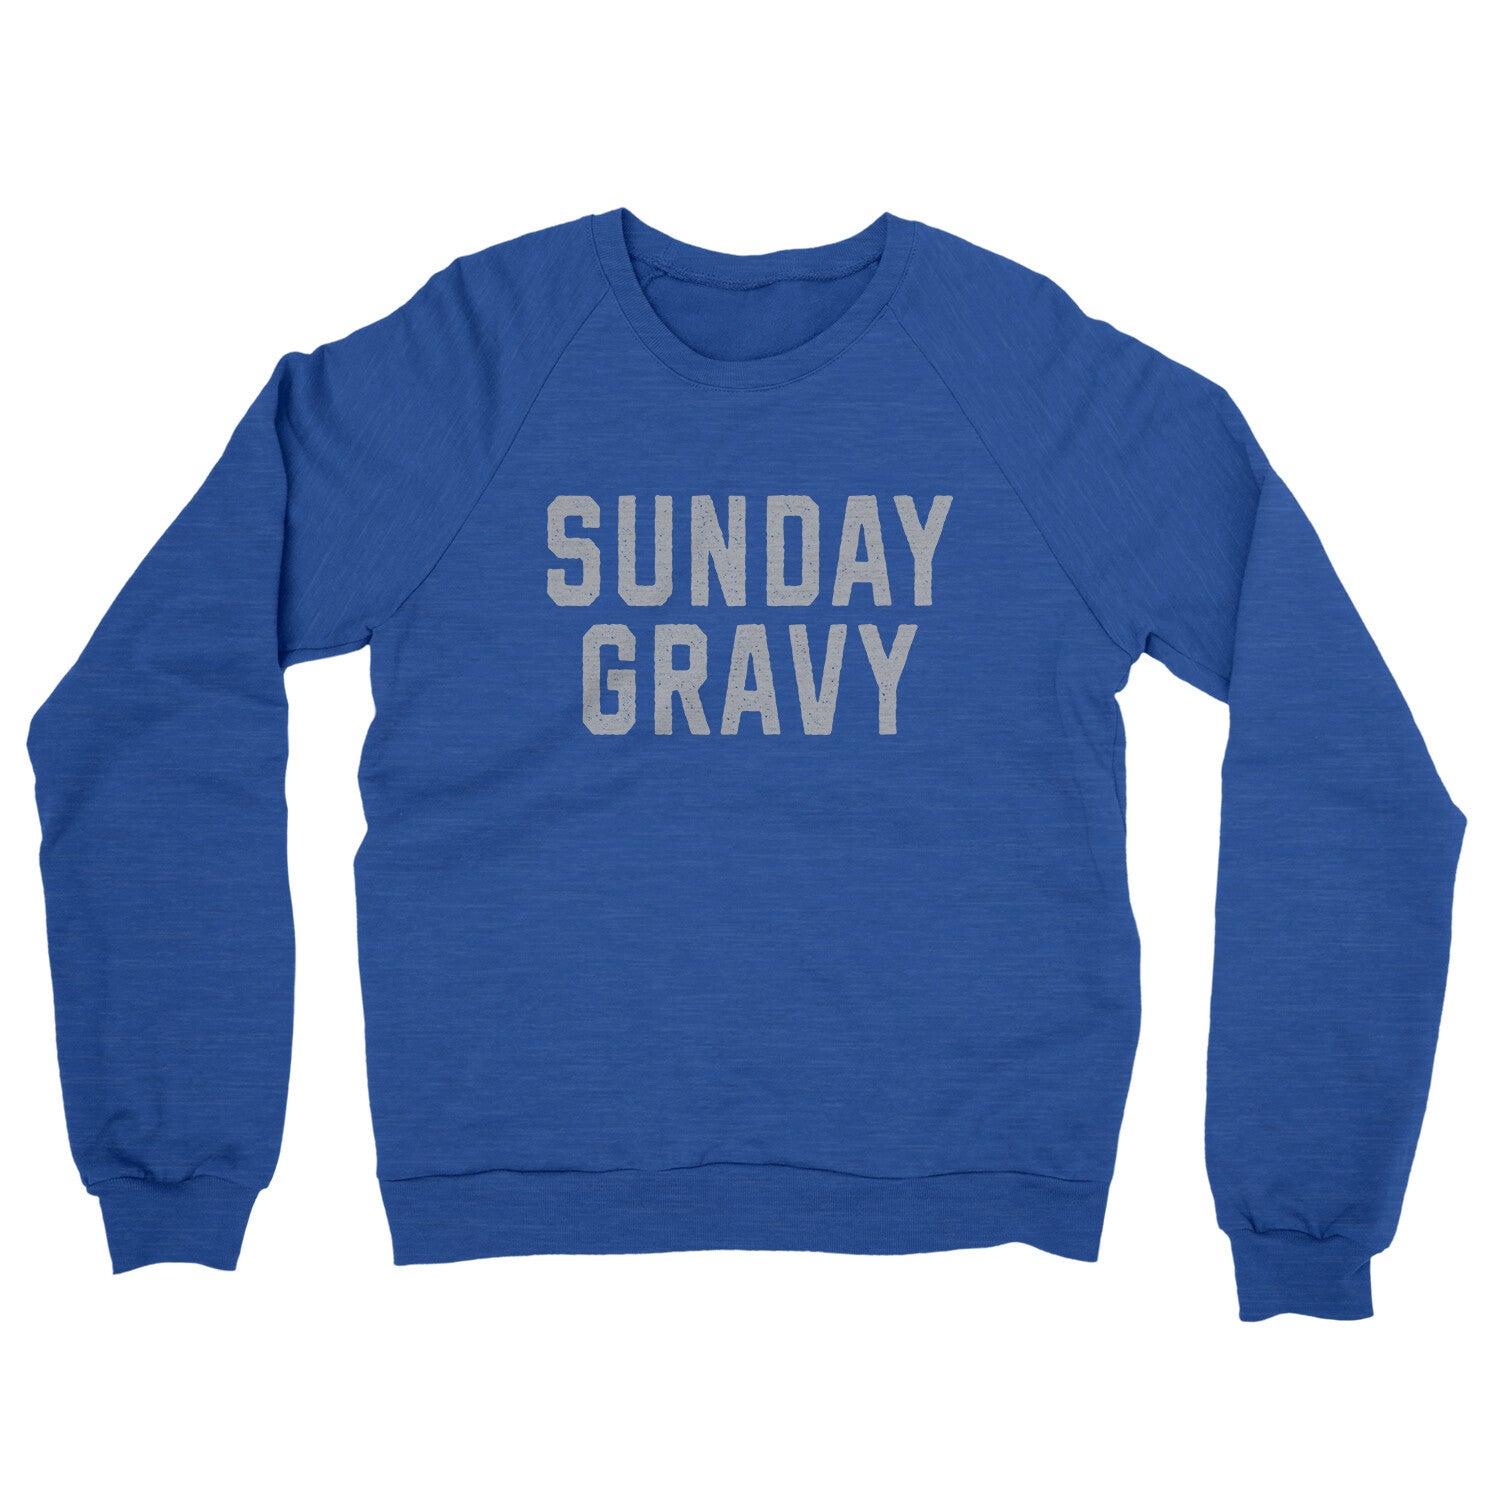 Sunday Gravy in Heather Royal Color